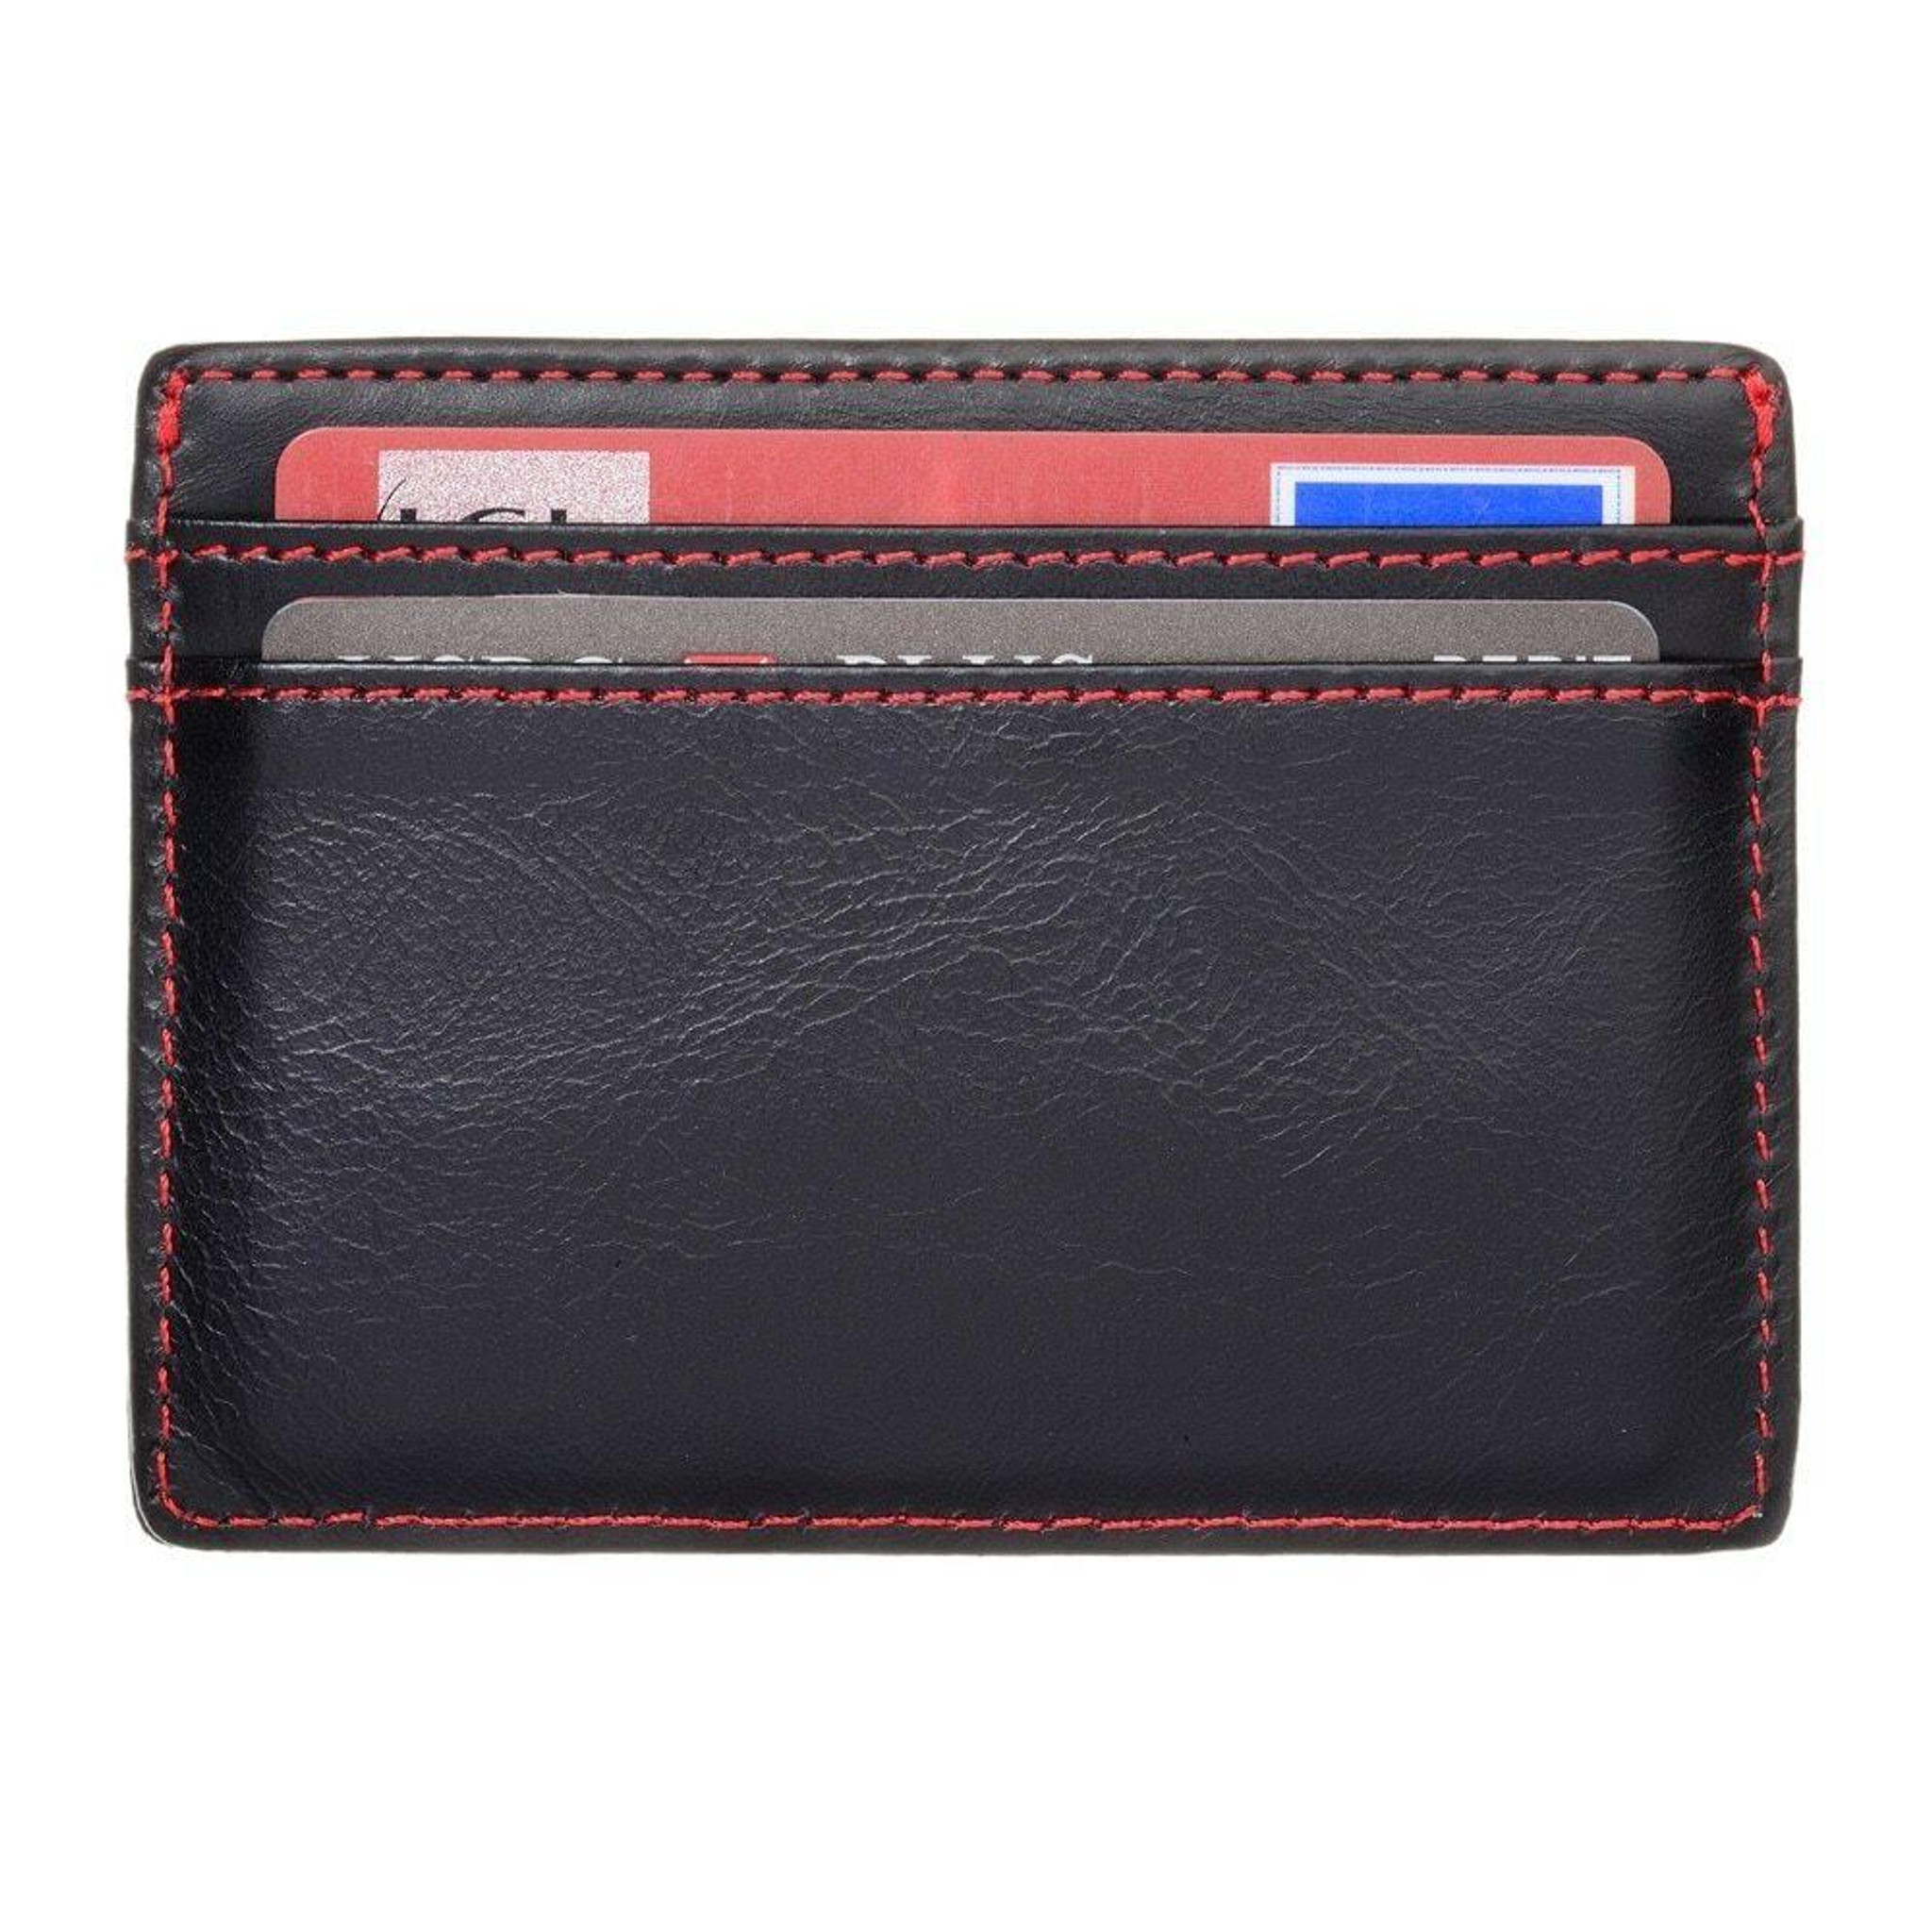 RFID Blocking Credit Card Holders by Ed Hicks, Real Leather, Men's